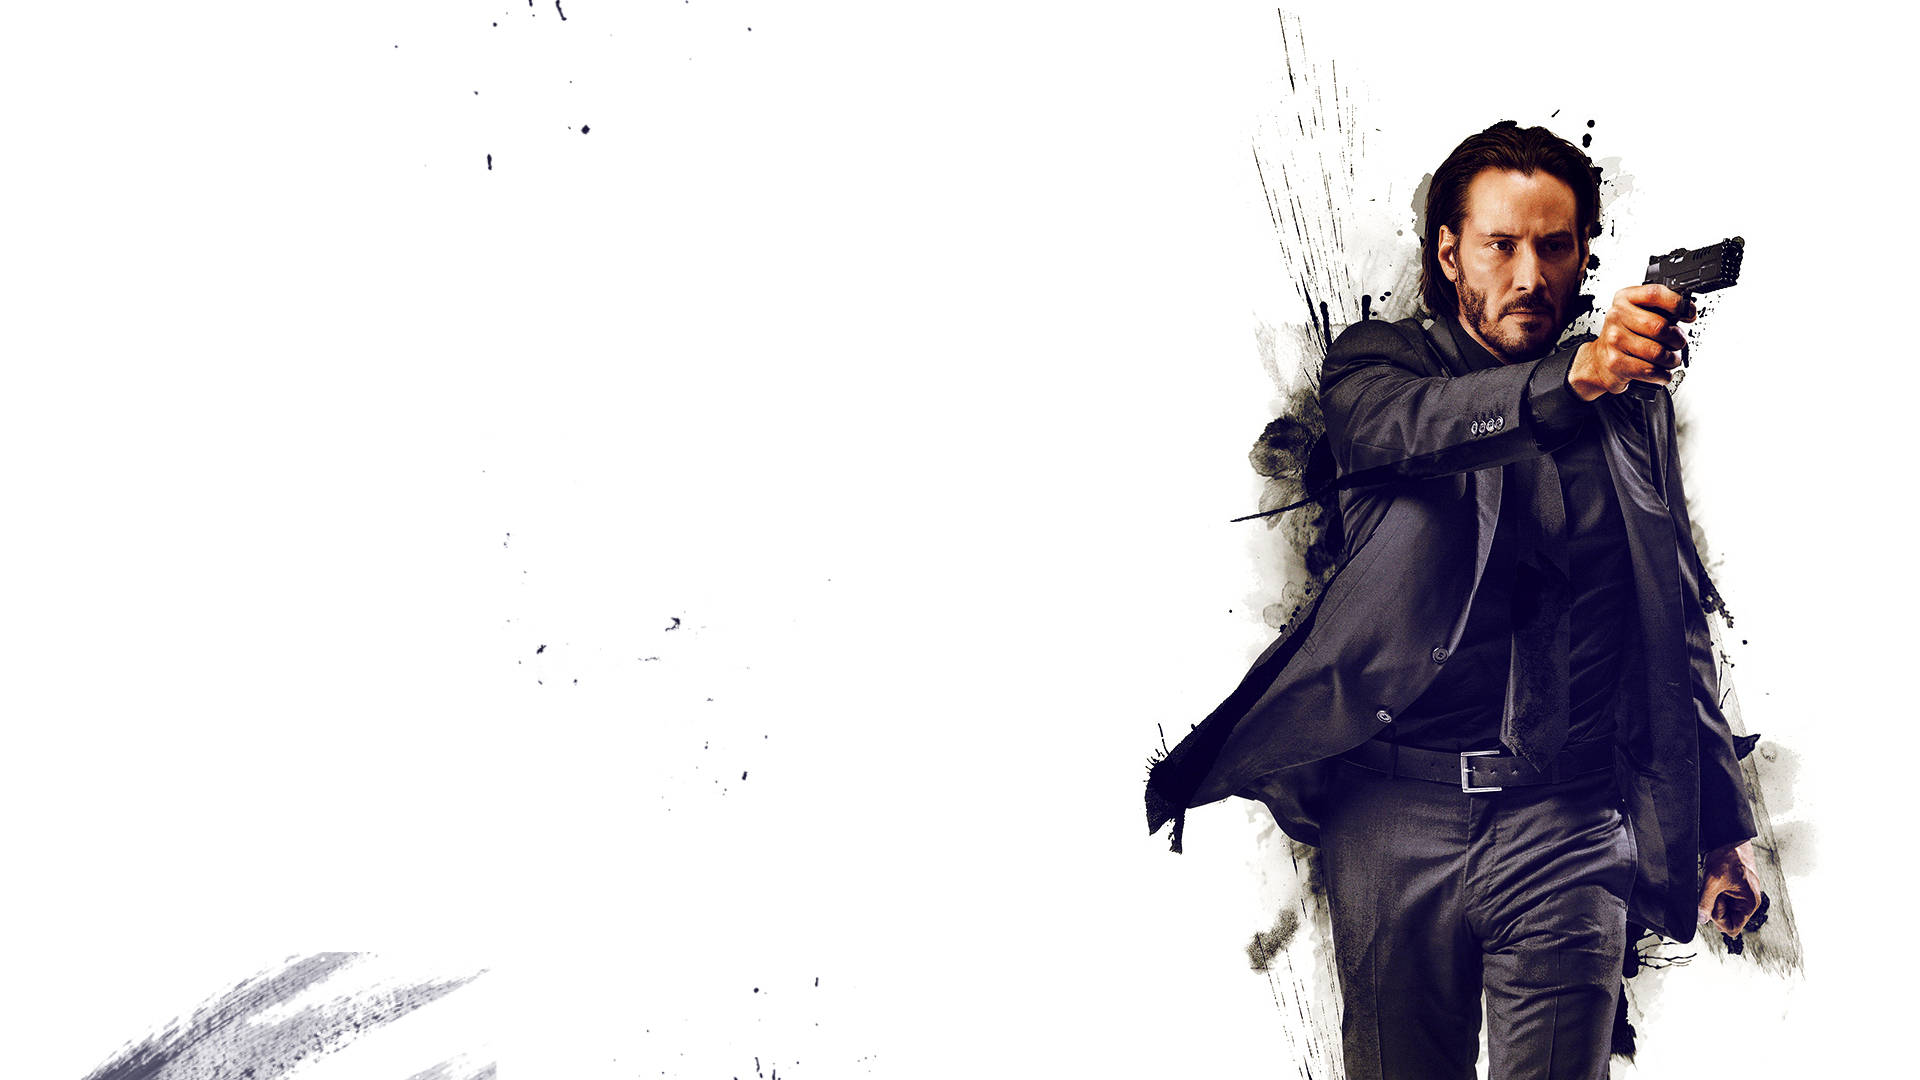 John Wick 1920X1080 Wallpaper and Background Image